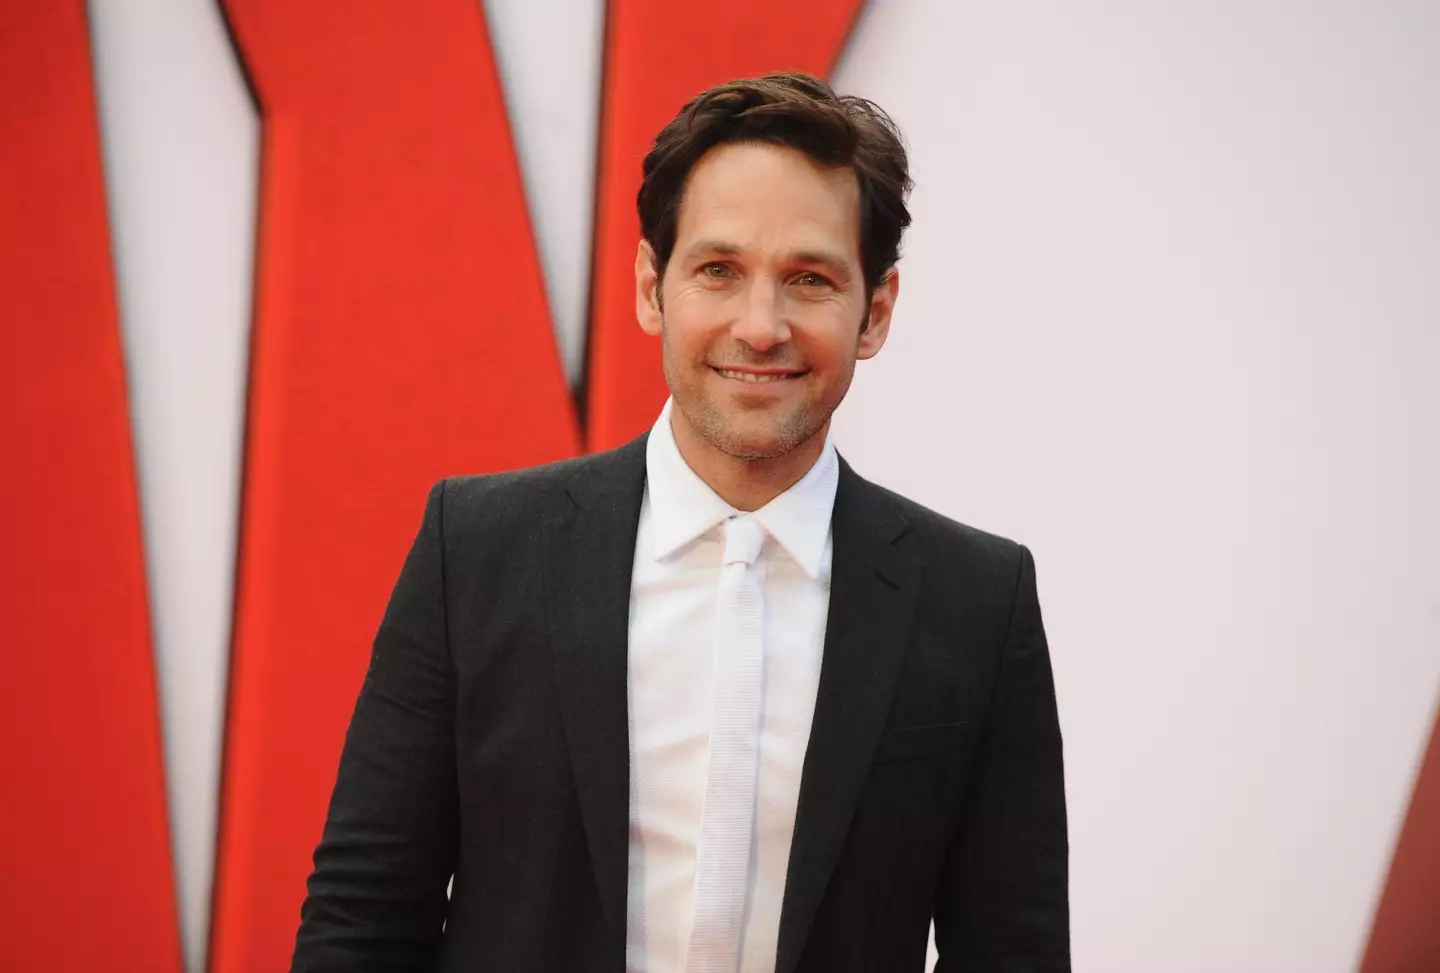 Paul Rudd doesn't appear to have aged at all throughout his years in the industry.